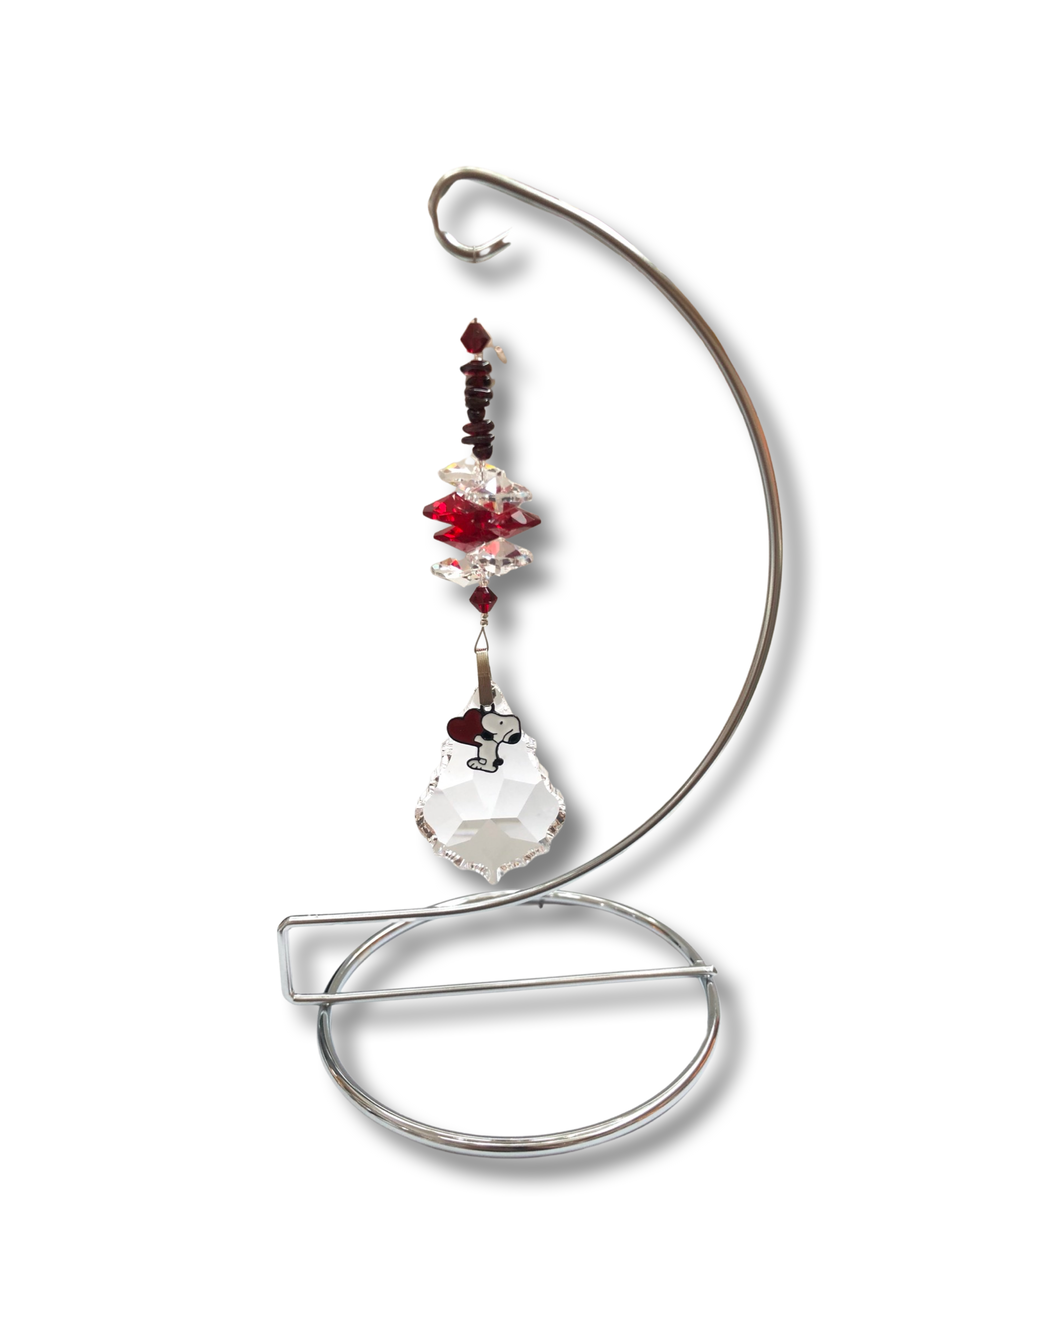 Snoopy large crystal stand, Decorated with crystals and garnet gemstones.